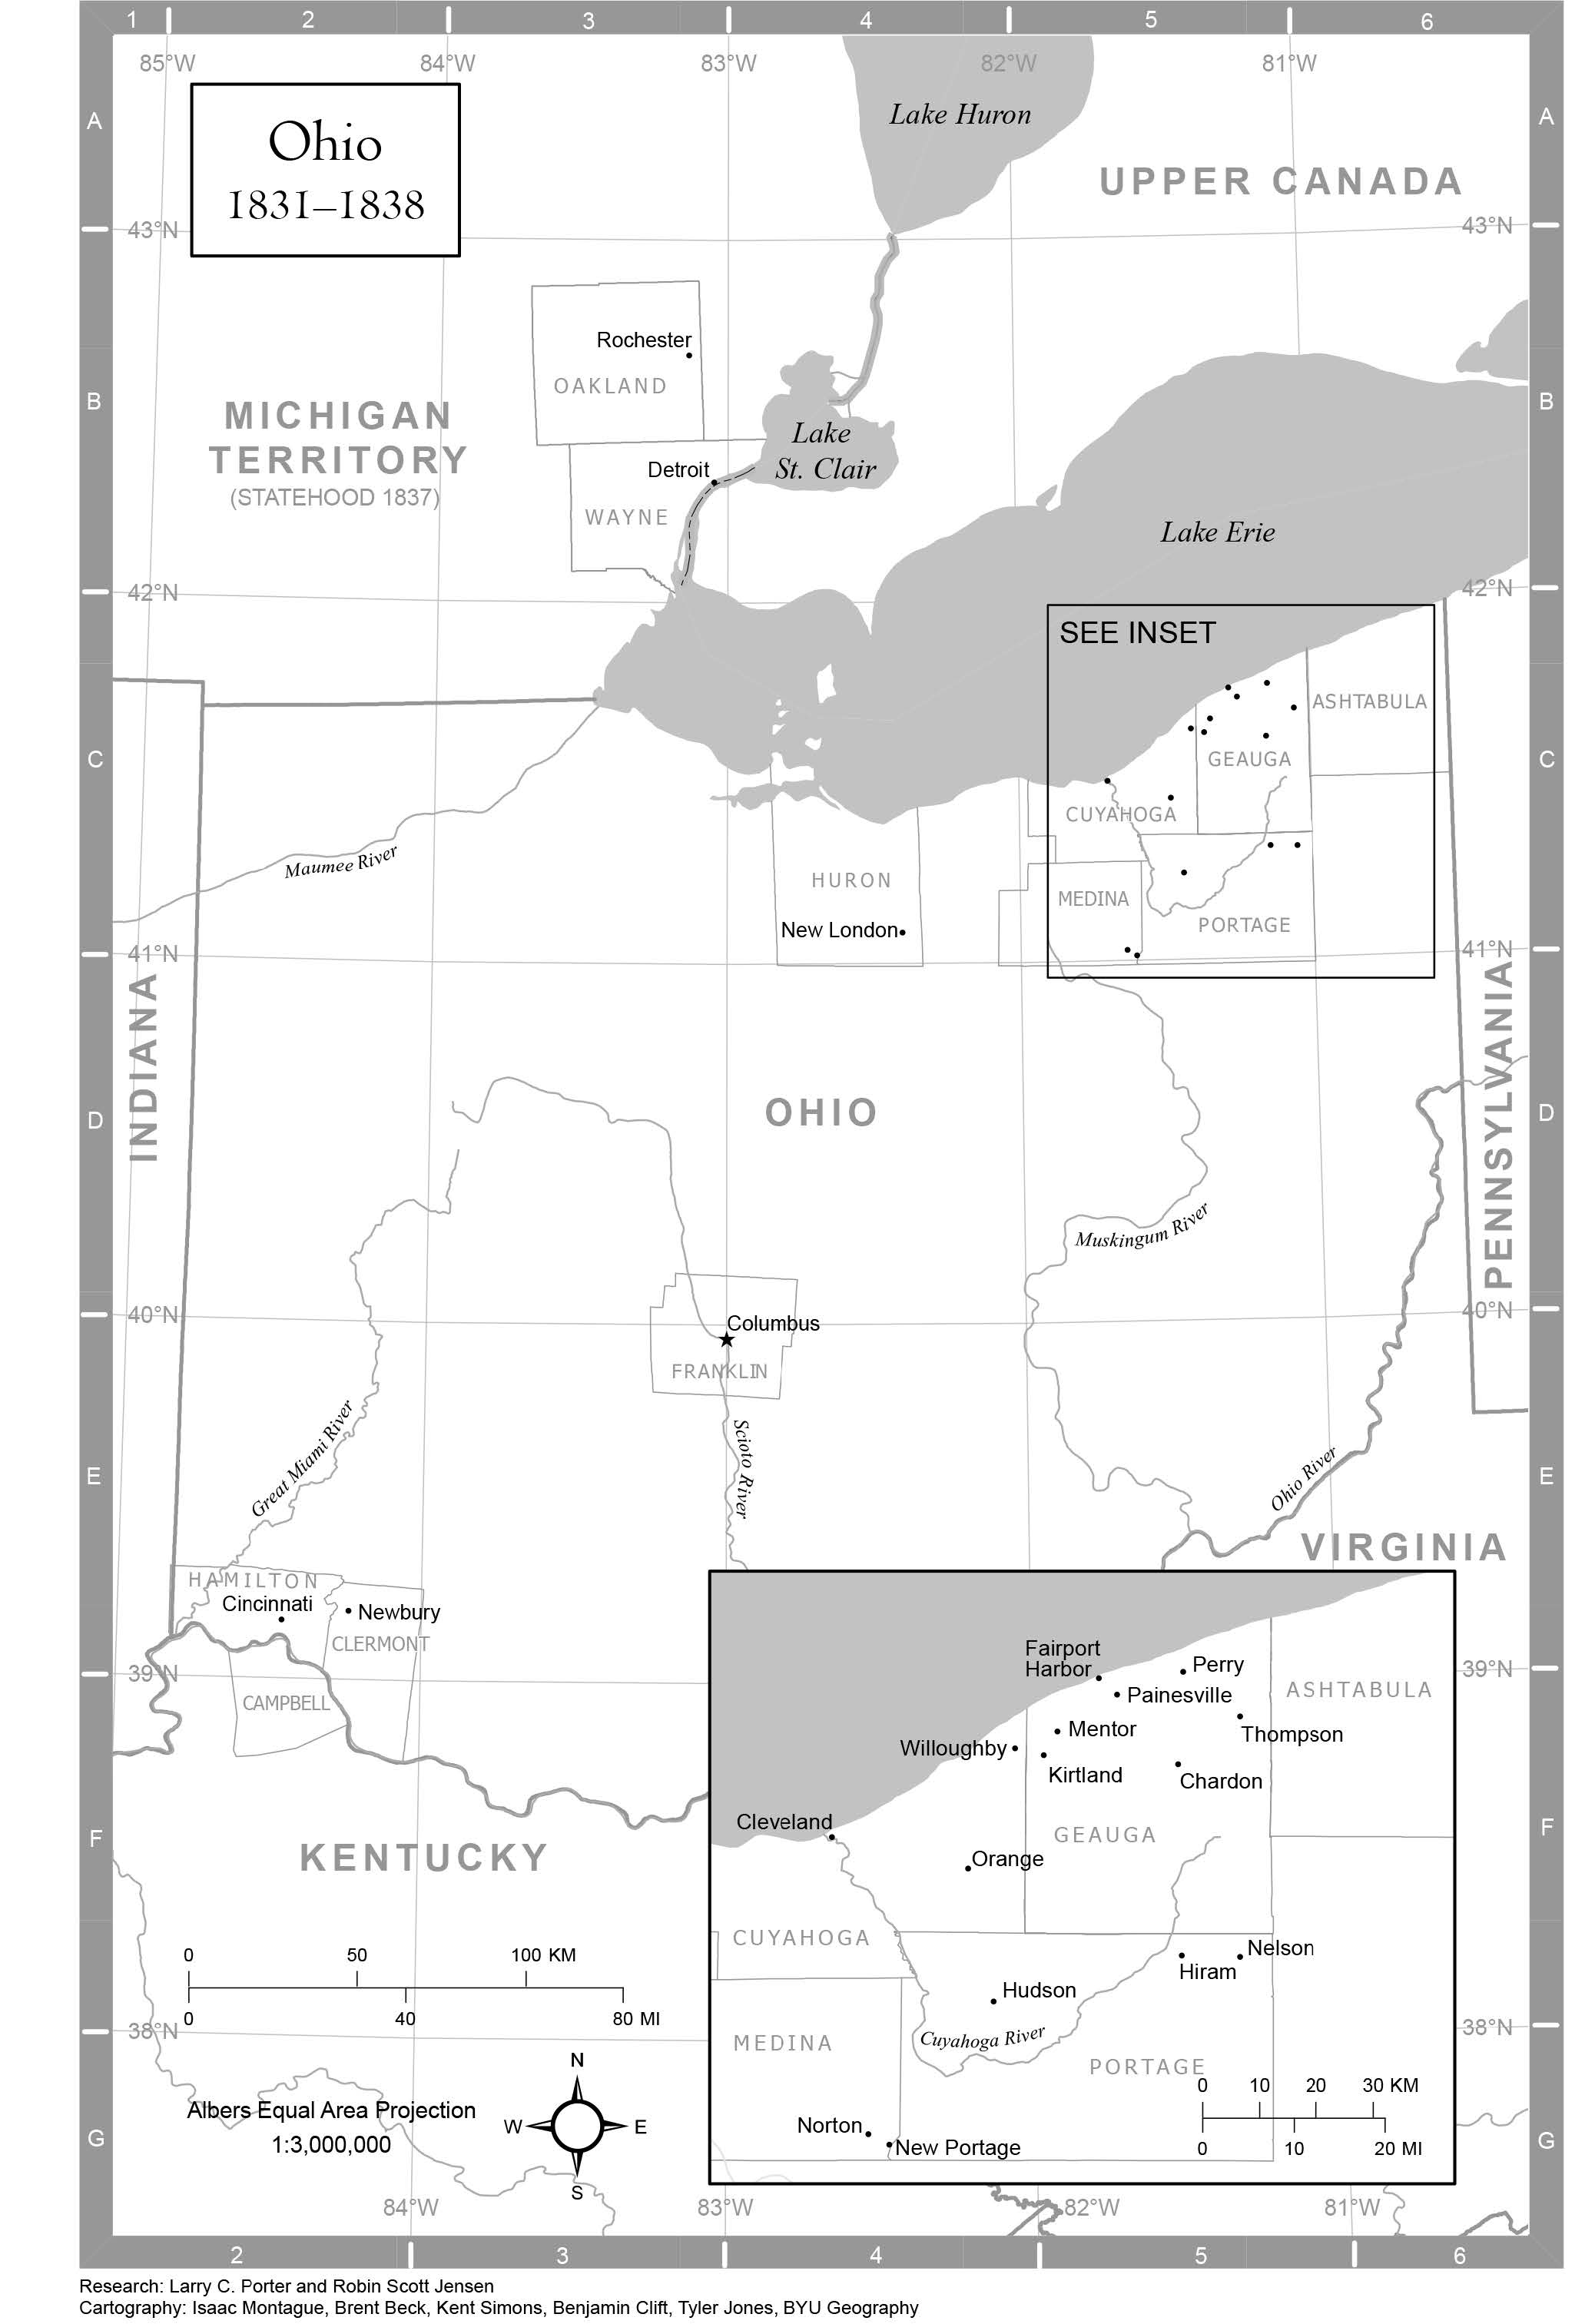 Ohio, 1831–1838. Courtesy of the Joseph Smith Papers Project.